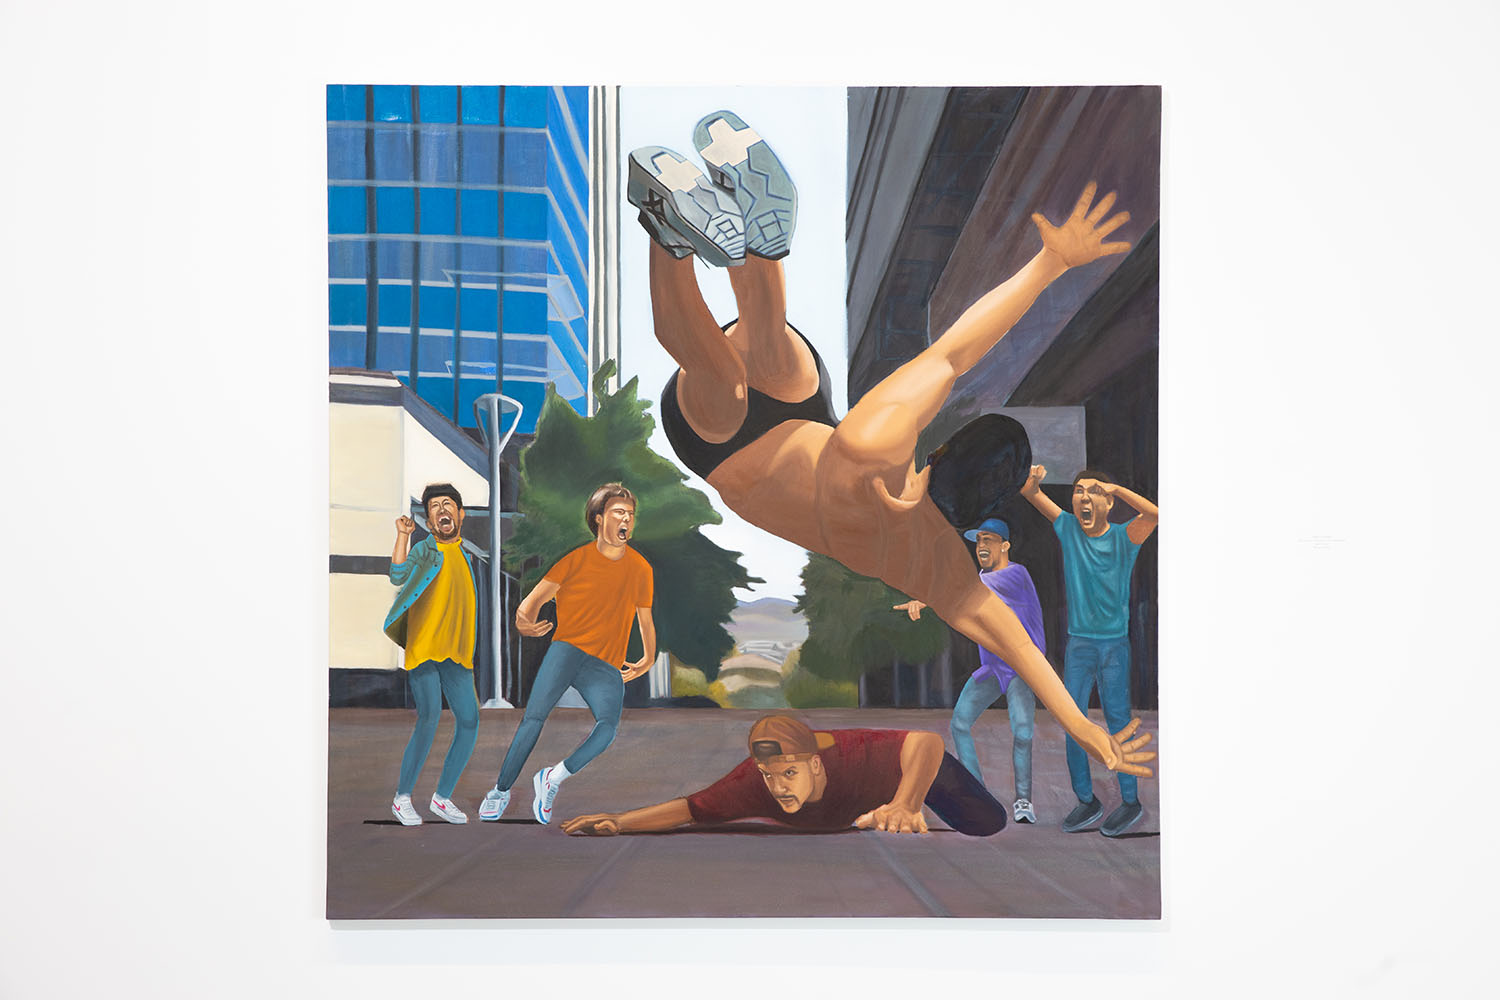 Oil painting of cheering crowd and breakdancer in mid-flight.